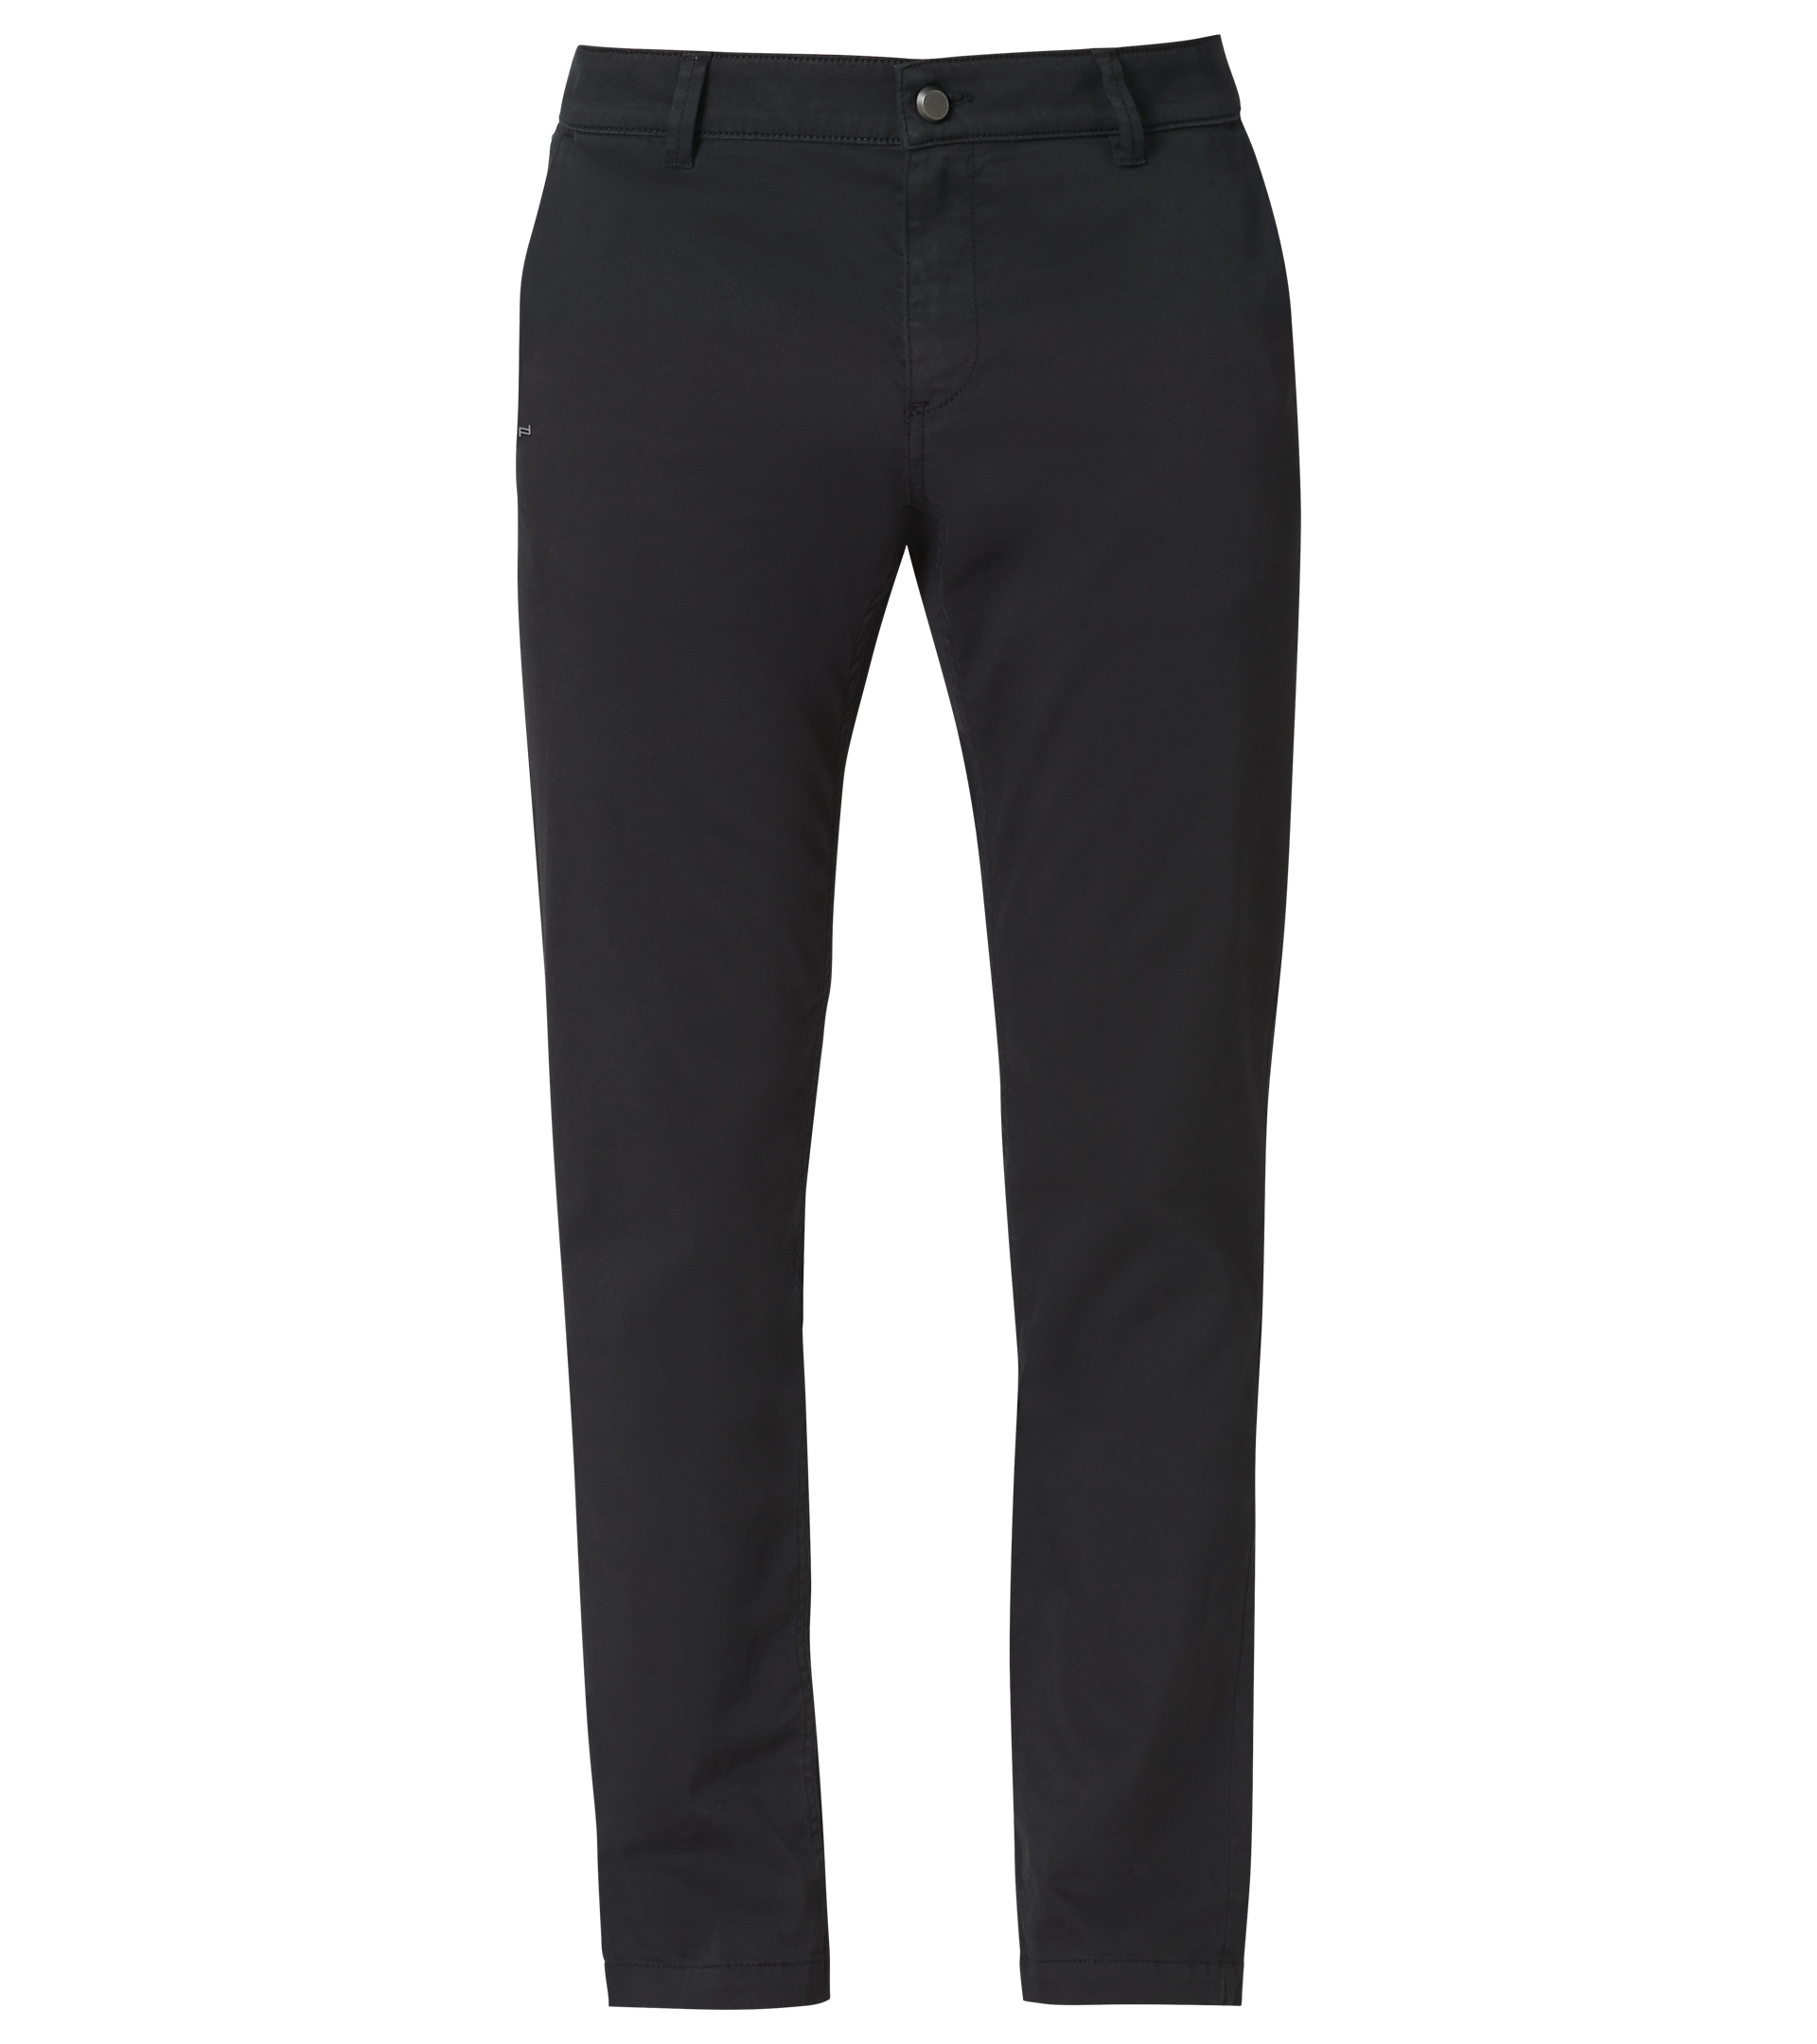 THE AWOKEN Mens Black Chinos Flat Front Stretch Casual Pants Black M   Amazonin Clothing  Accessories